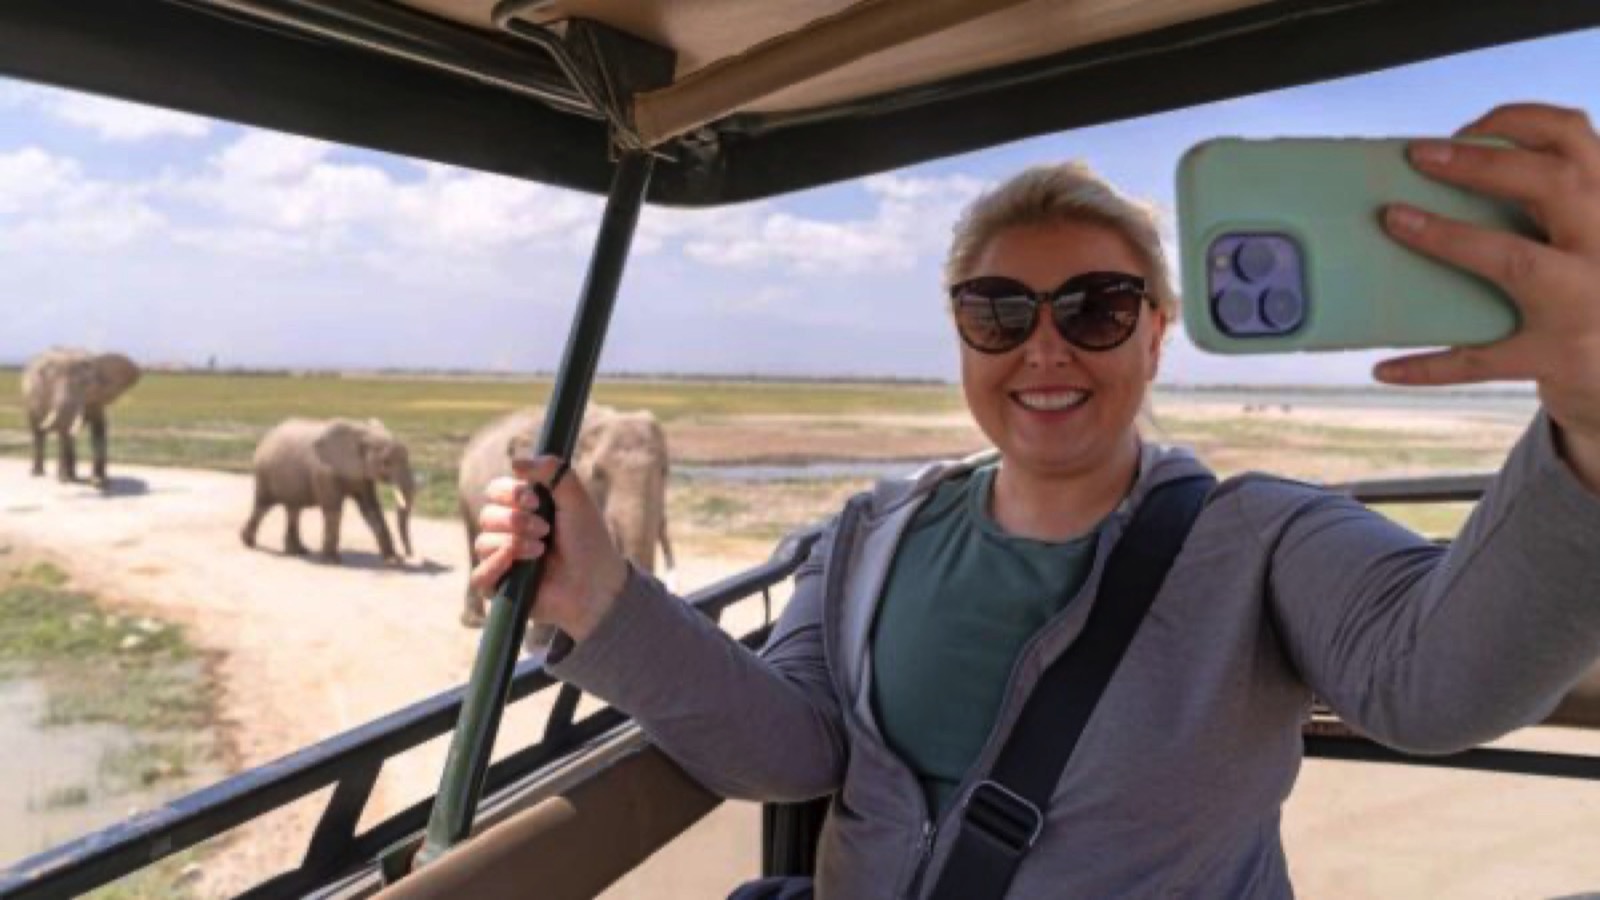 <p>Africa is home to some of the world’s most incredible wildlife, and a safari is the perfect way to experience this natural beauty up close. <span>The</span><span> animals</span><span> you</span><span> see</span><span> on</span><span> TV</span><span> are</span><span> nothing</span><span> compared</span><span> to</span><span> the</span><span> majesty</span><span> of seeing them up close </span><span>in</span><span> their</span><span>natural</span><span> habitat.</span><span> So if you're a person who has always dreamed of going on safari and taking in the wilds of Africa, here is a list of <a href="https://theholidaydealers.com/20-Must-See-African-Animals">must-see animals</a> in that once-in-a-lifetime opportunity.</span></p>